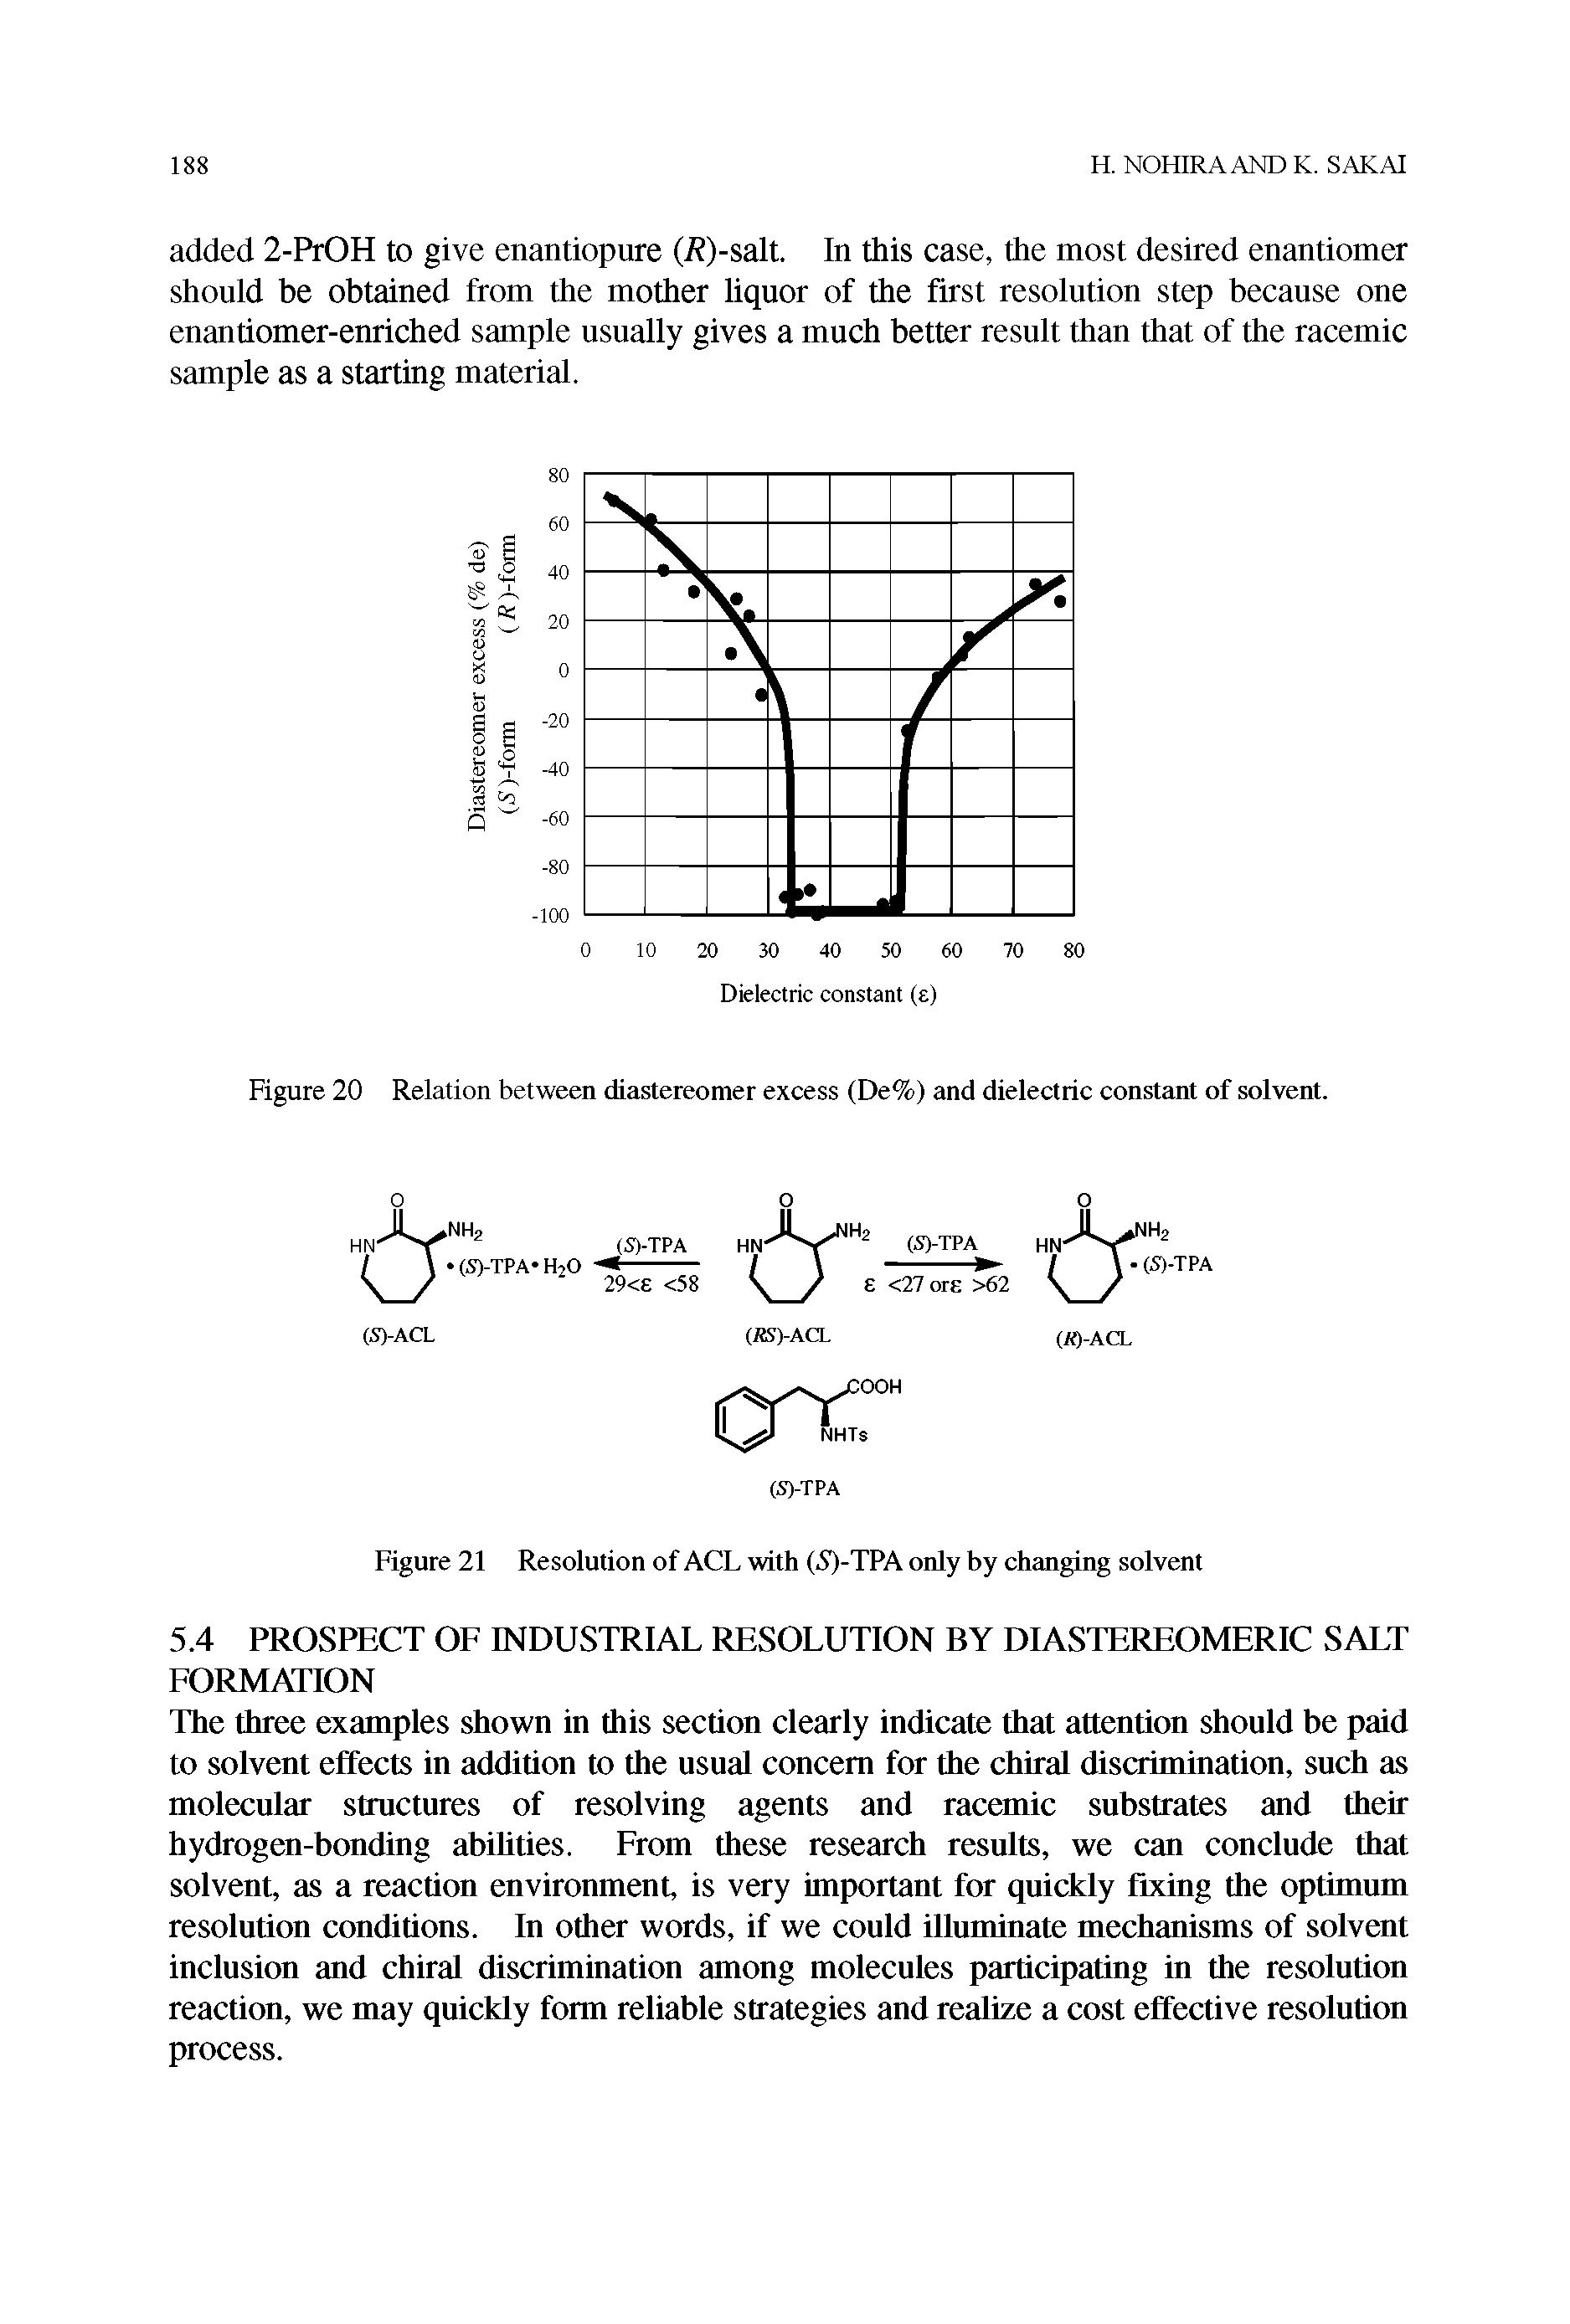 Figure 20 Relation between diastereomer excess (De%) and dielectric constant of solvent.